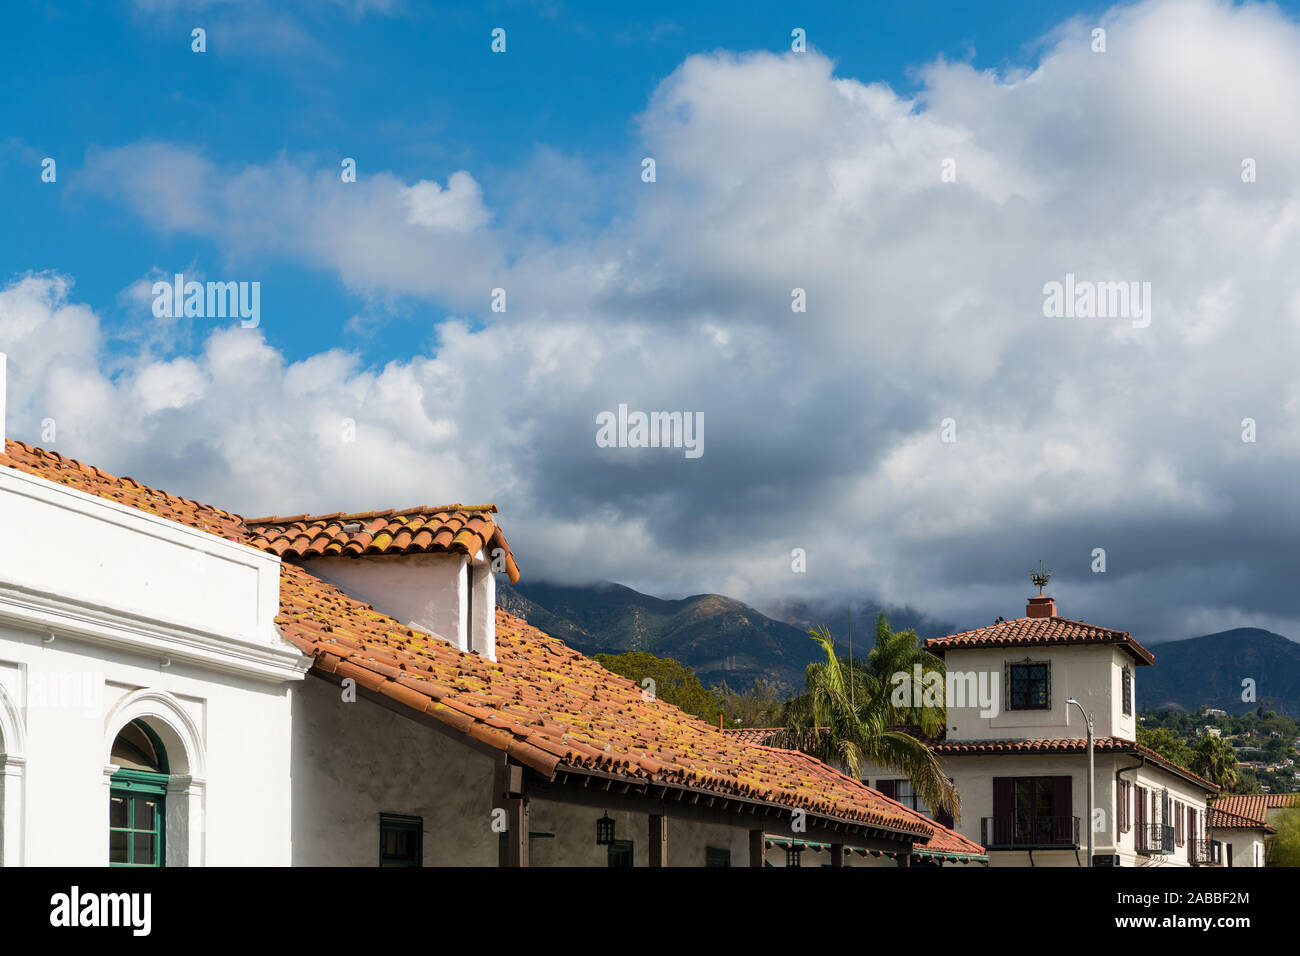 Typical scene of Spanish Colonial Revival architecture buidlings with white plaster walls and red tile roofs under palm trees, mountains, and white fl Stock Photo